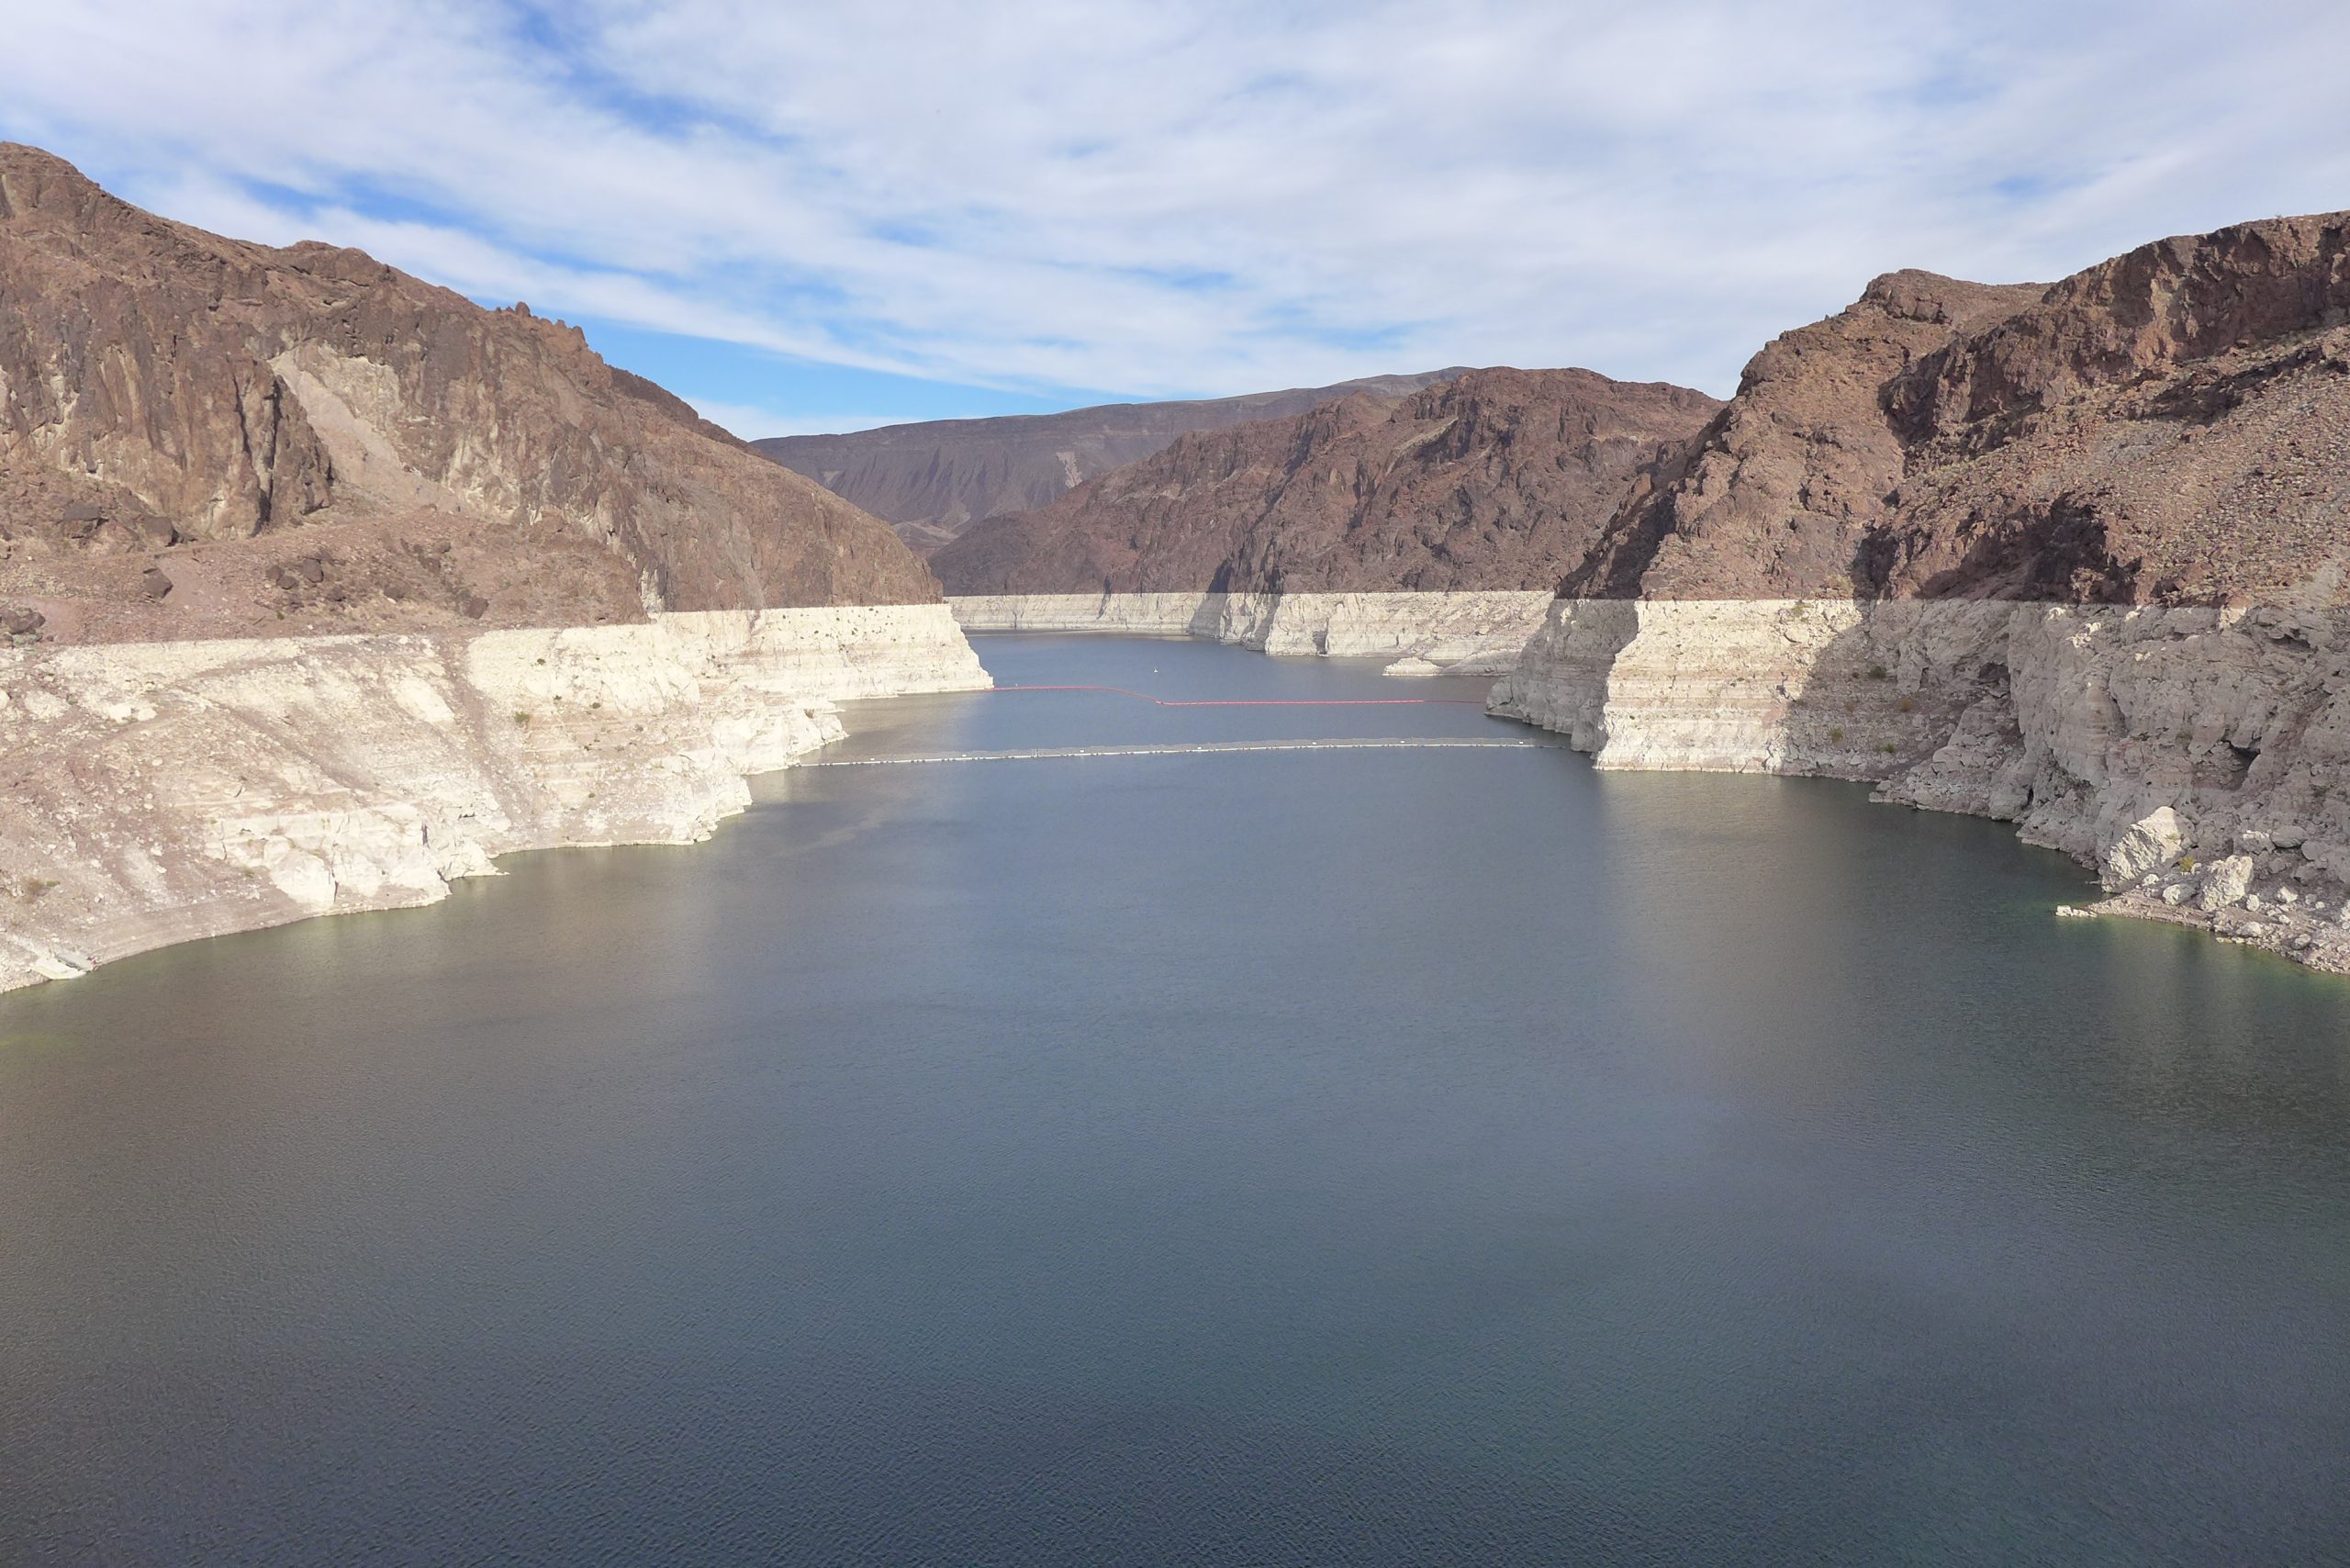 Dropping reservoirs create &lsquo;green light&rsquo; for sustainability on Colorado River - Aspen Journalism